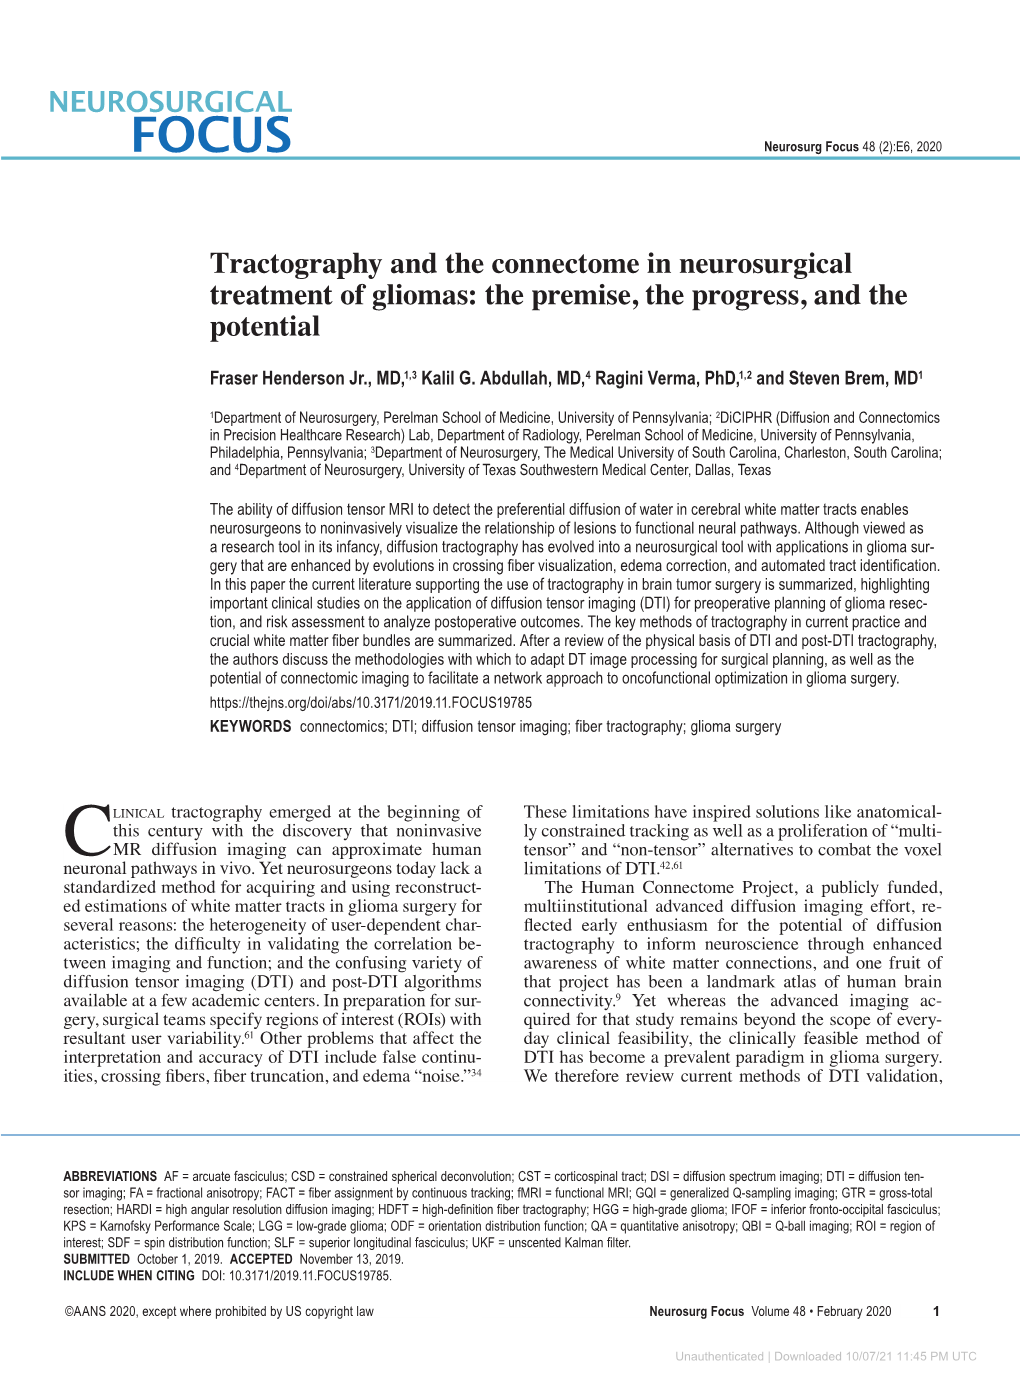 Tractography and the Connectome in Neurosurgical Treatment of Gliomas: the Premise, the Progress, and the Potential